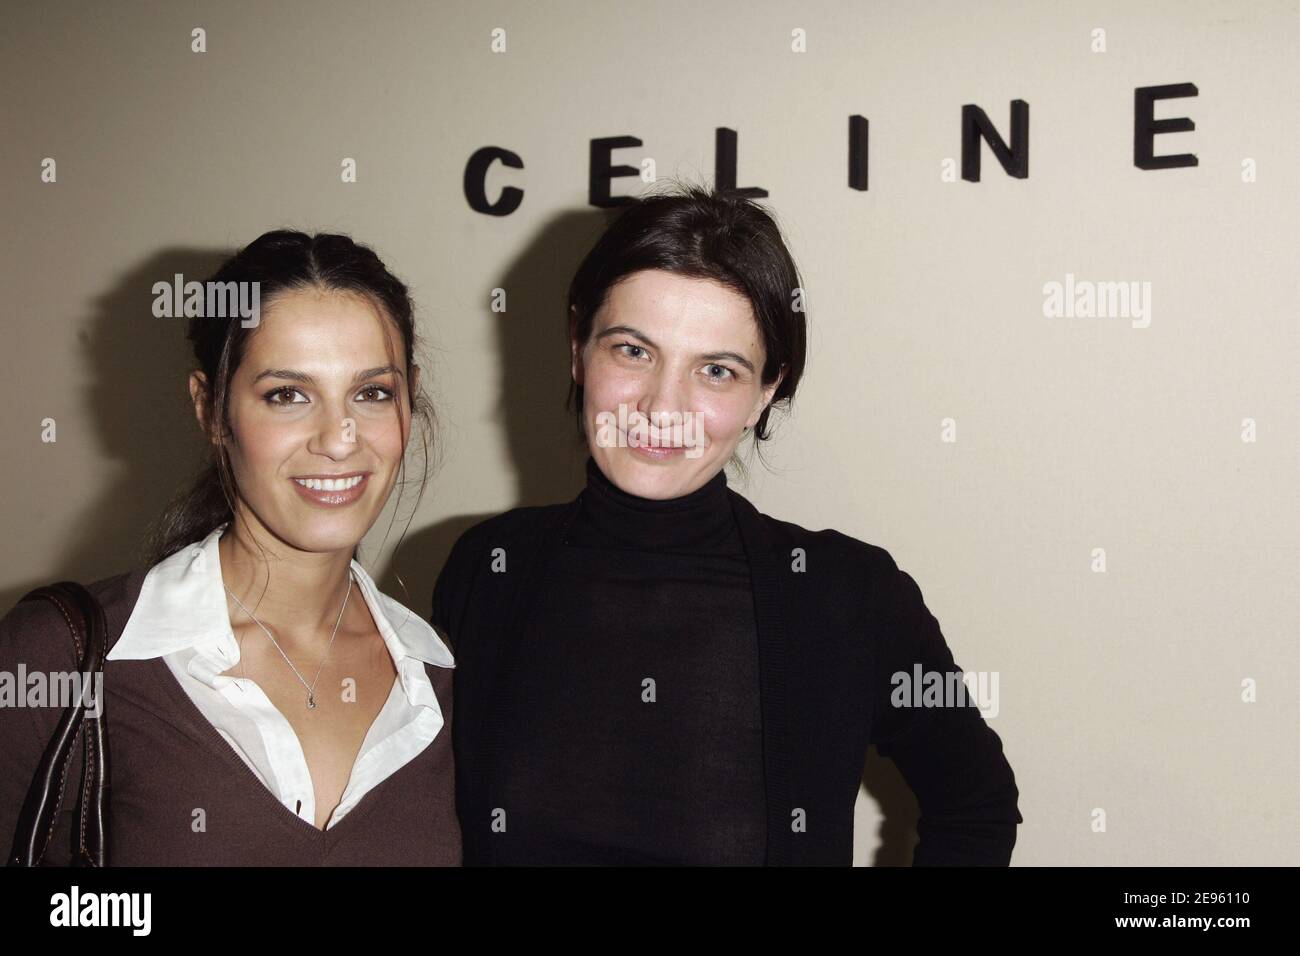 French actress Elisa Tovati and Croatian fashion designer Ivana Omazi pose backstage after Ivana's Fall-Winter 2006-2007 Ready-to-Wear fashion show for Celine in Paris, France, on March 2, 2006. Photo by Orban-Taamallah-Zabulon/ABACAPRESS.COM Stock Photo